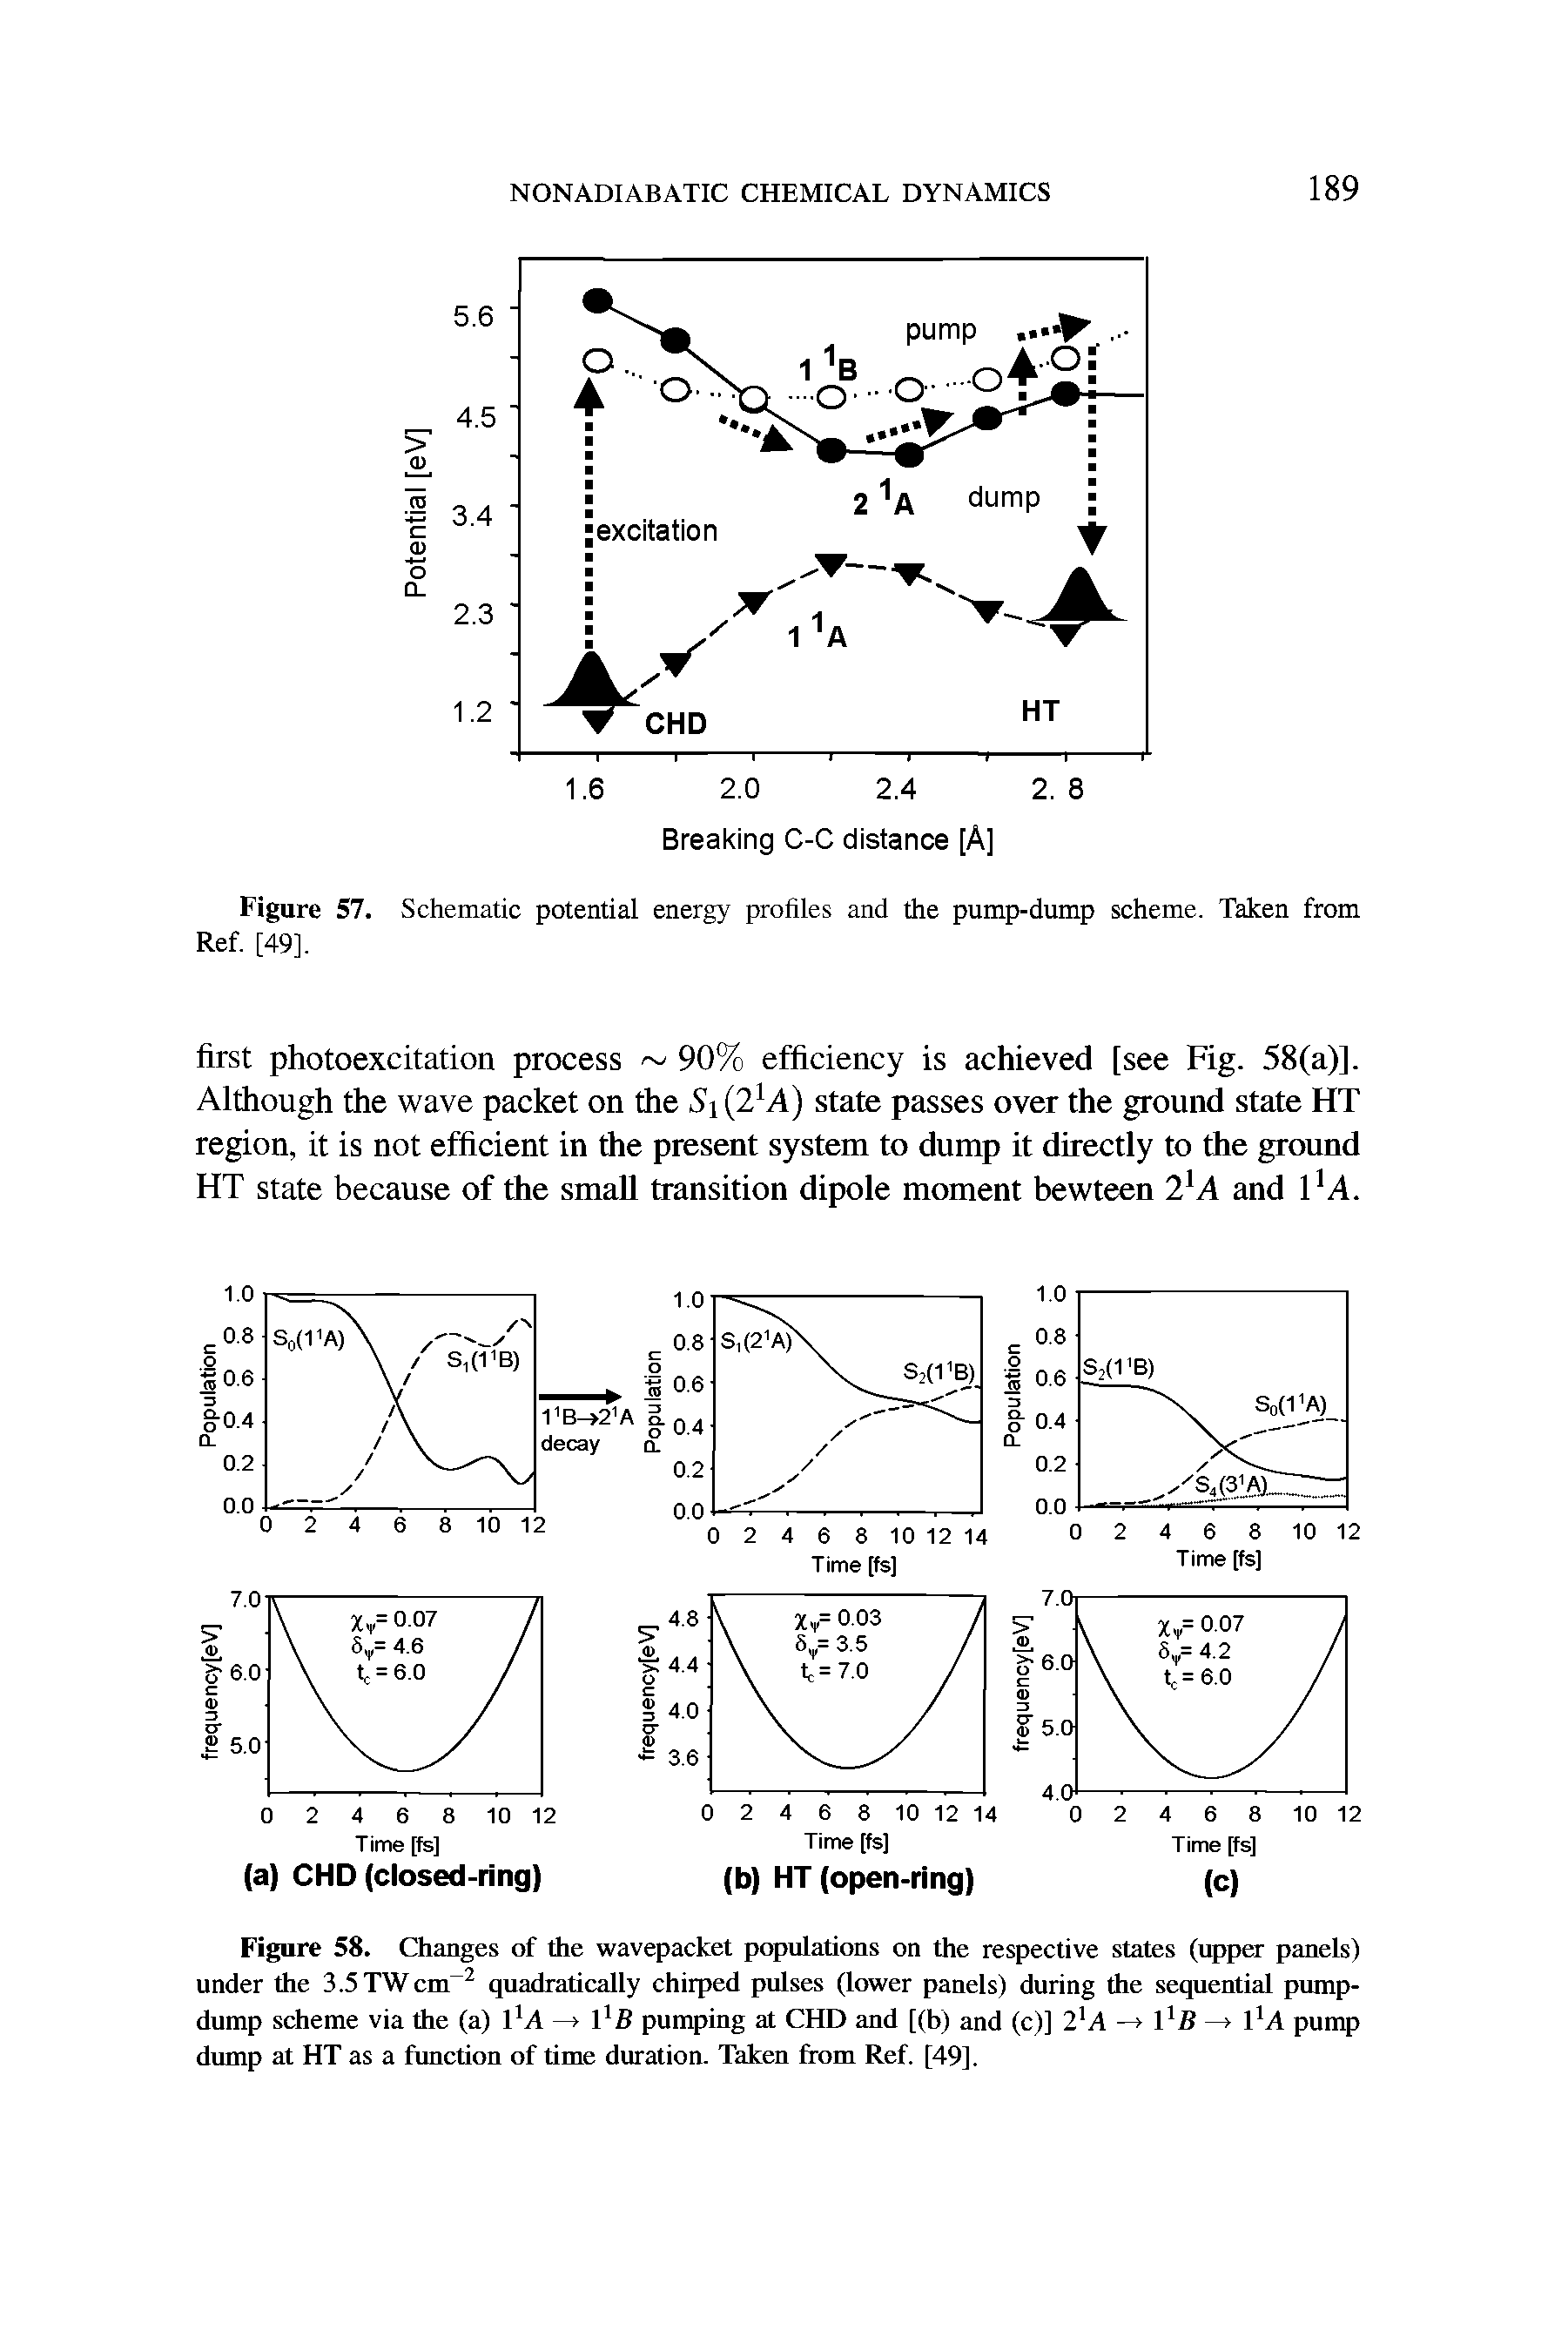 Figure 58. Changes of the wavepacket populations on the respective states (upper panels) under the 3.5TWcm quadratically chirped pulses (lower panels) during the sequential pump-dump scheme via the (a) I A —> I B pumping at CHD and [(b) and (c)] 2 A I B —> I A pump...